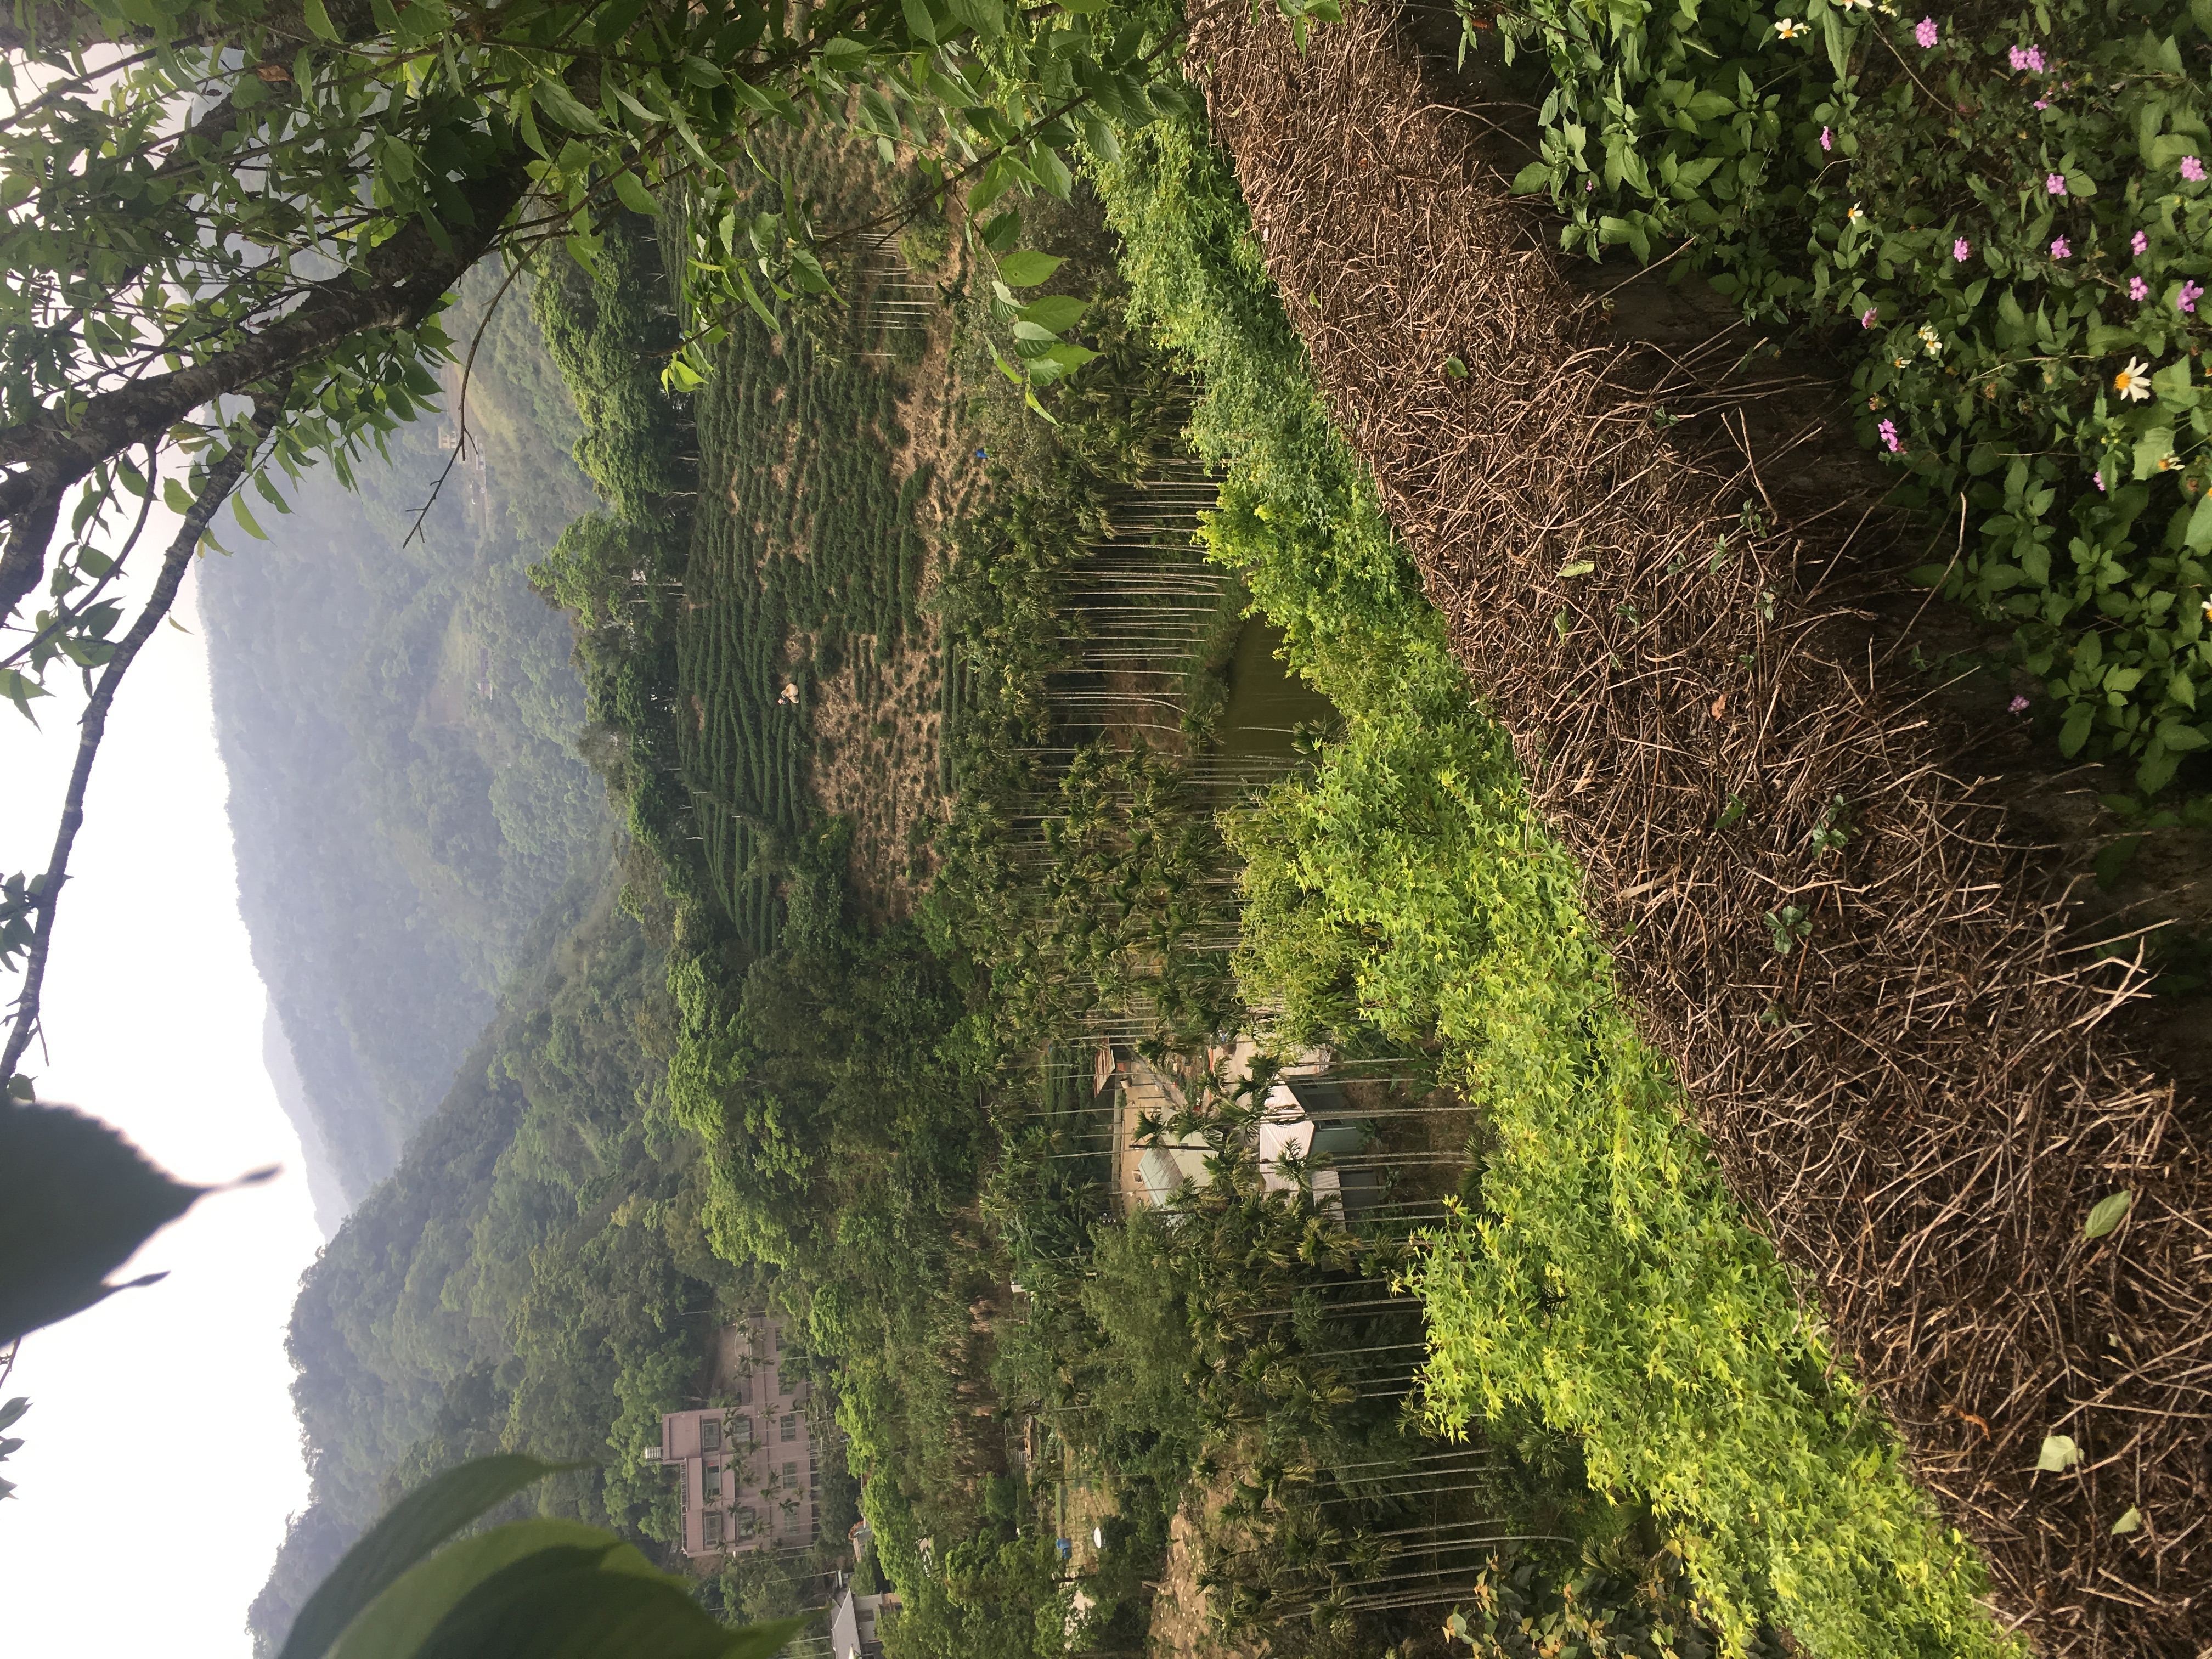 View from a hiking trail in Pinglin, Taiwan. Tea fields and palm trees in the distance, flowers and foliage in the foreground.